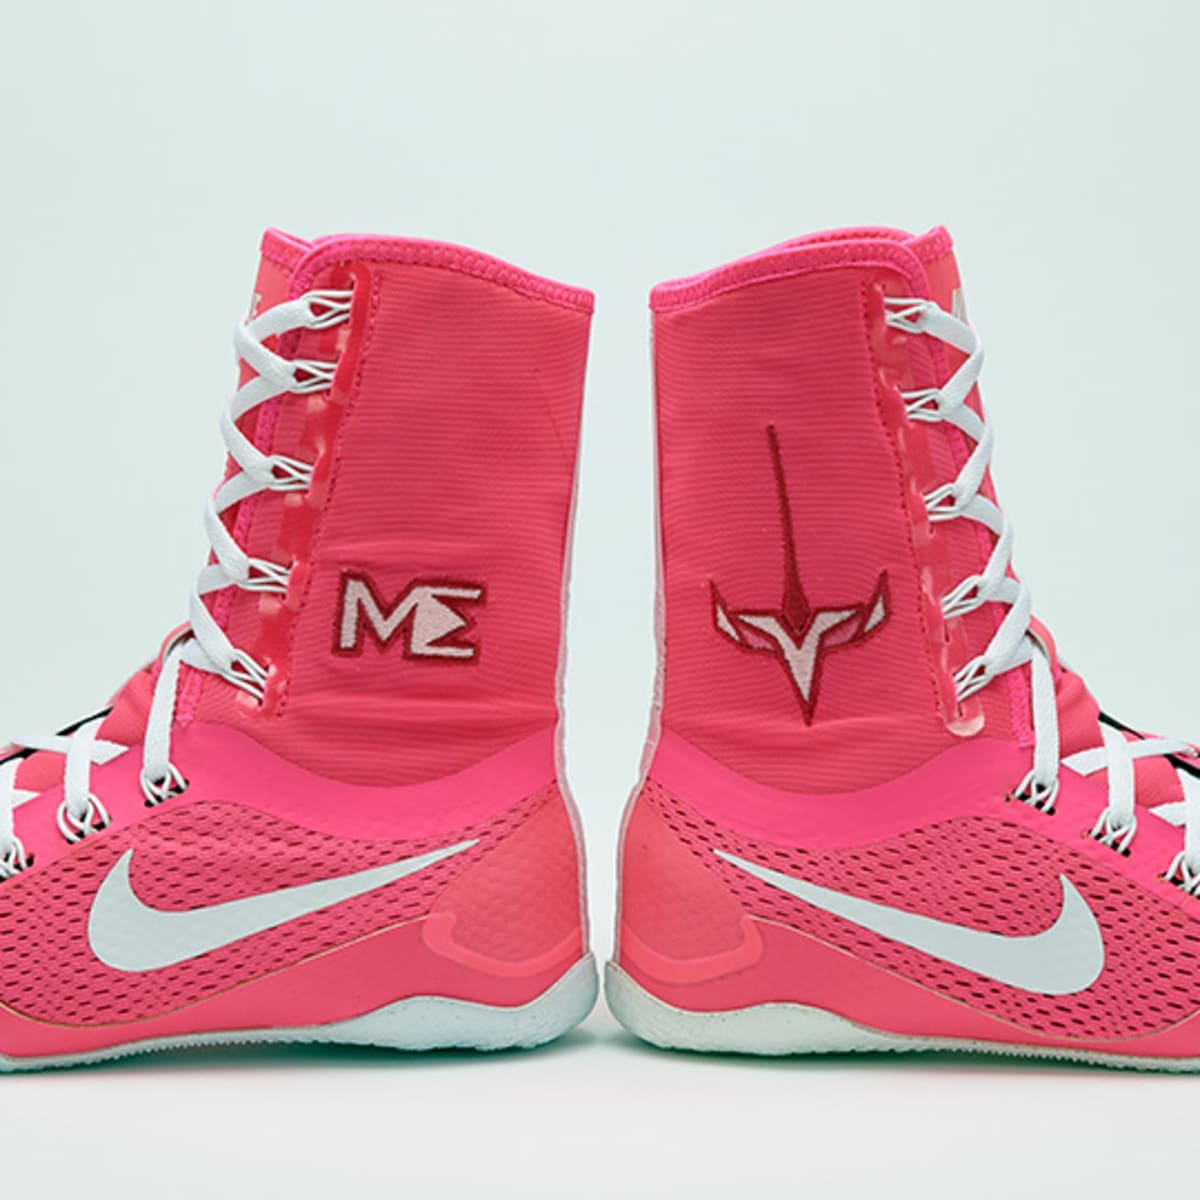 nike boxing boots